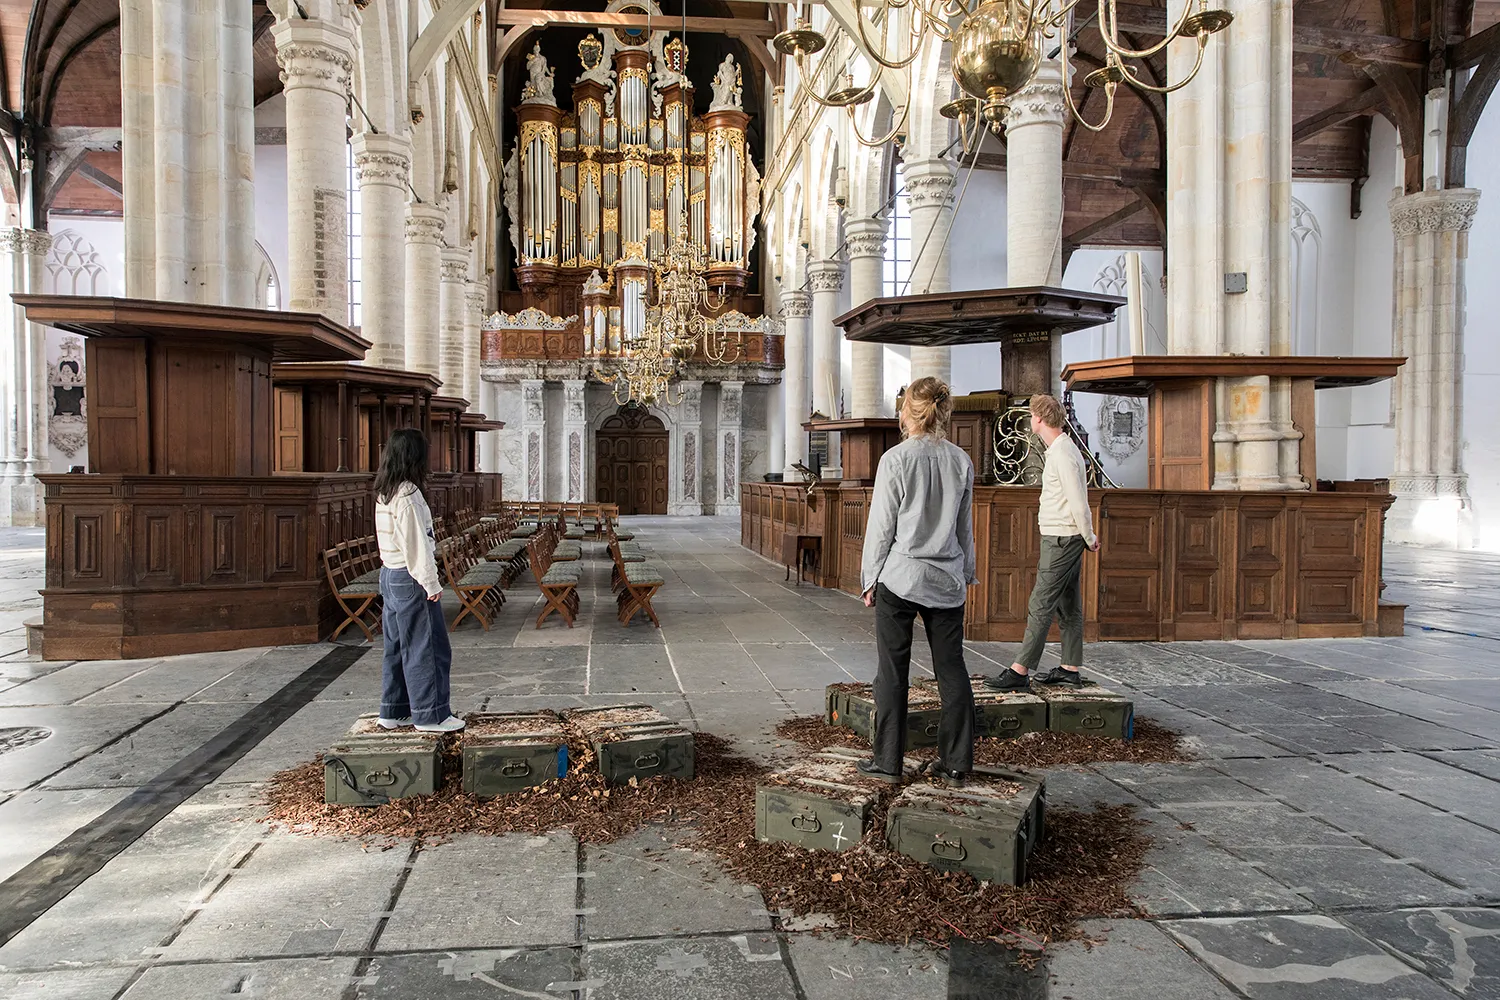 Three individuals standing on green wooden boxes placed on wood chips, while staring towards the church organ inside the Oude Kerk